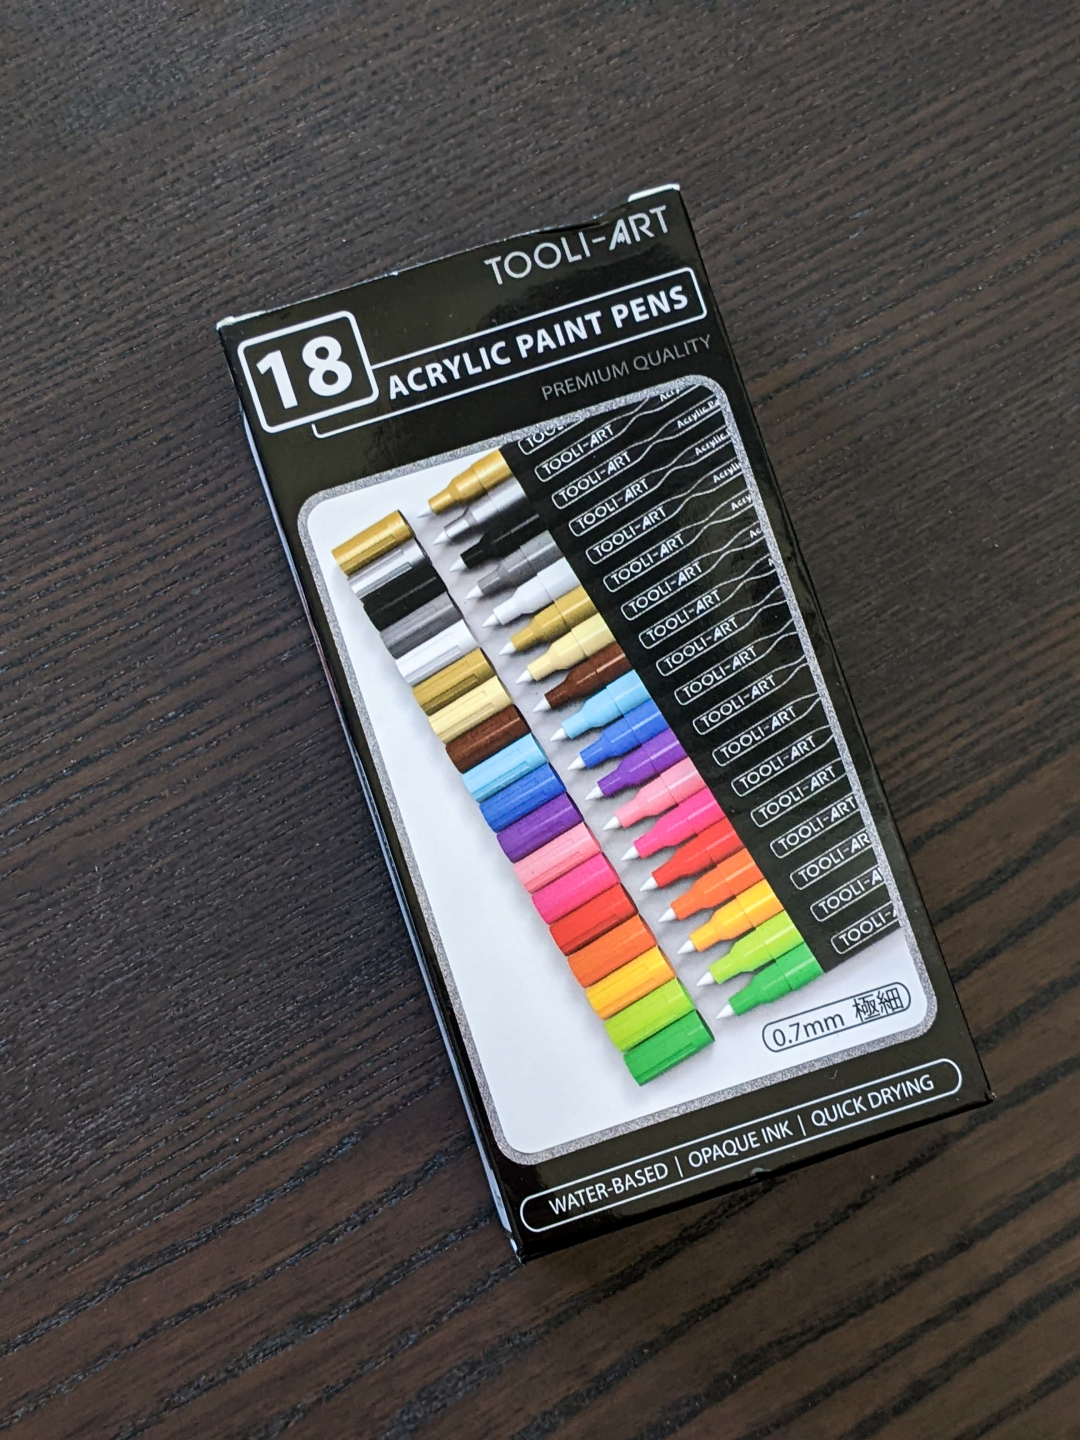 Quick Sticks Quick-Drying Painting Pens for Art Projects